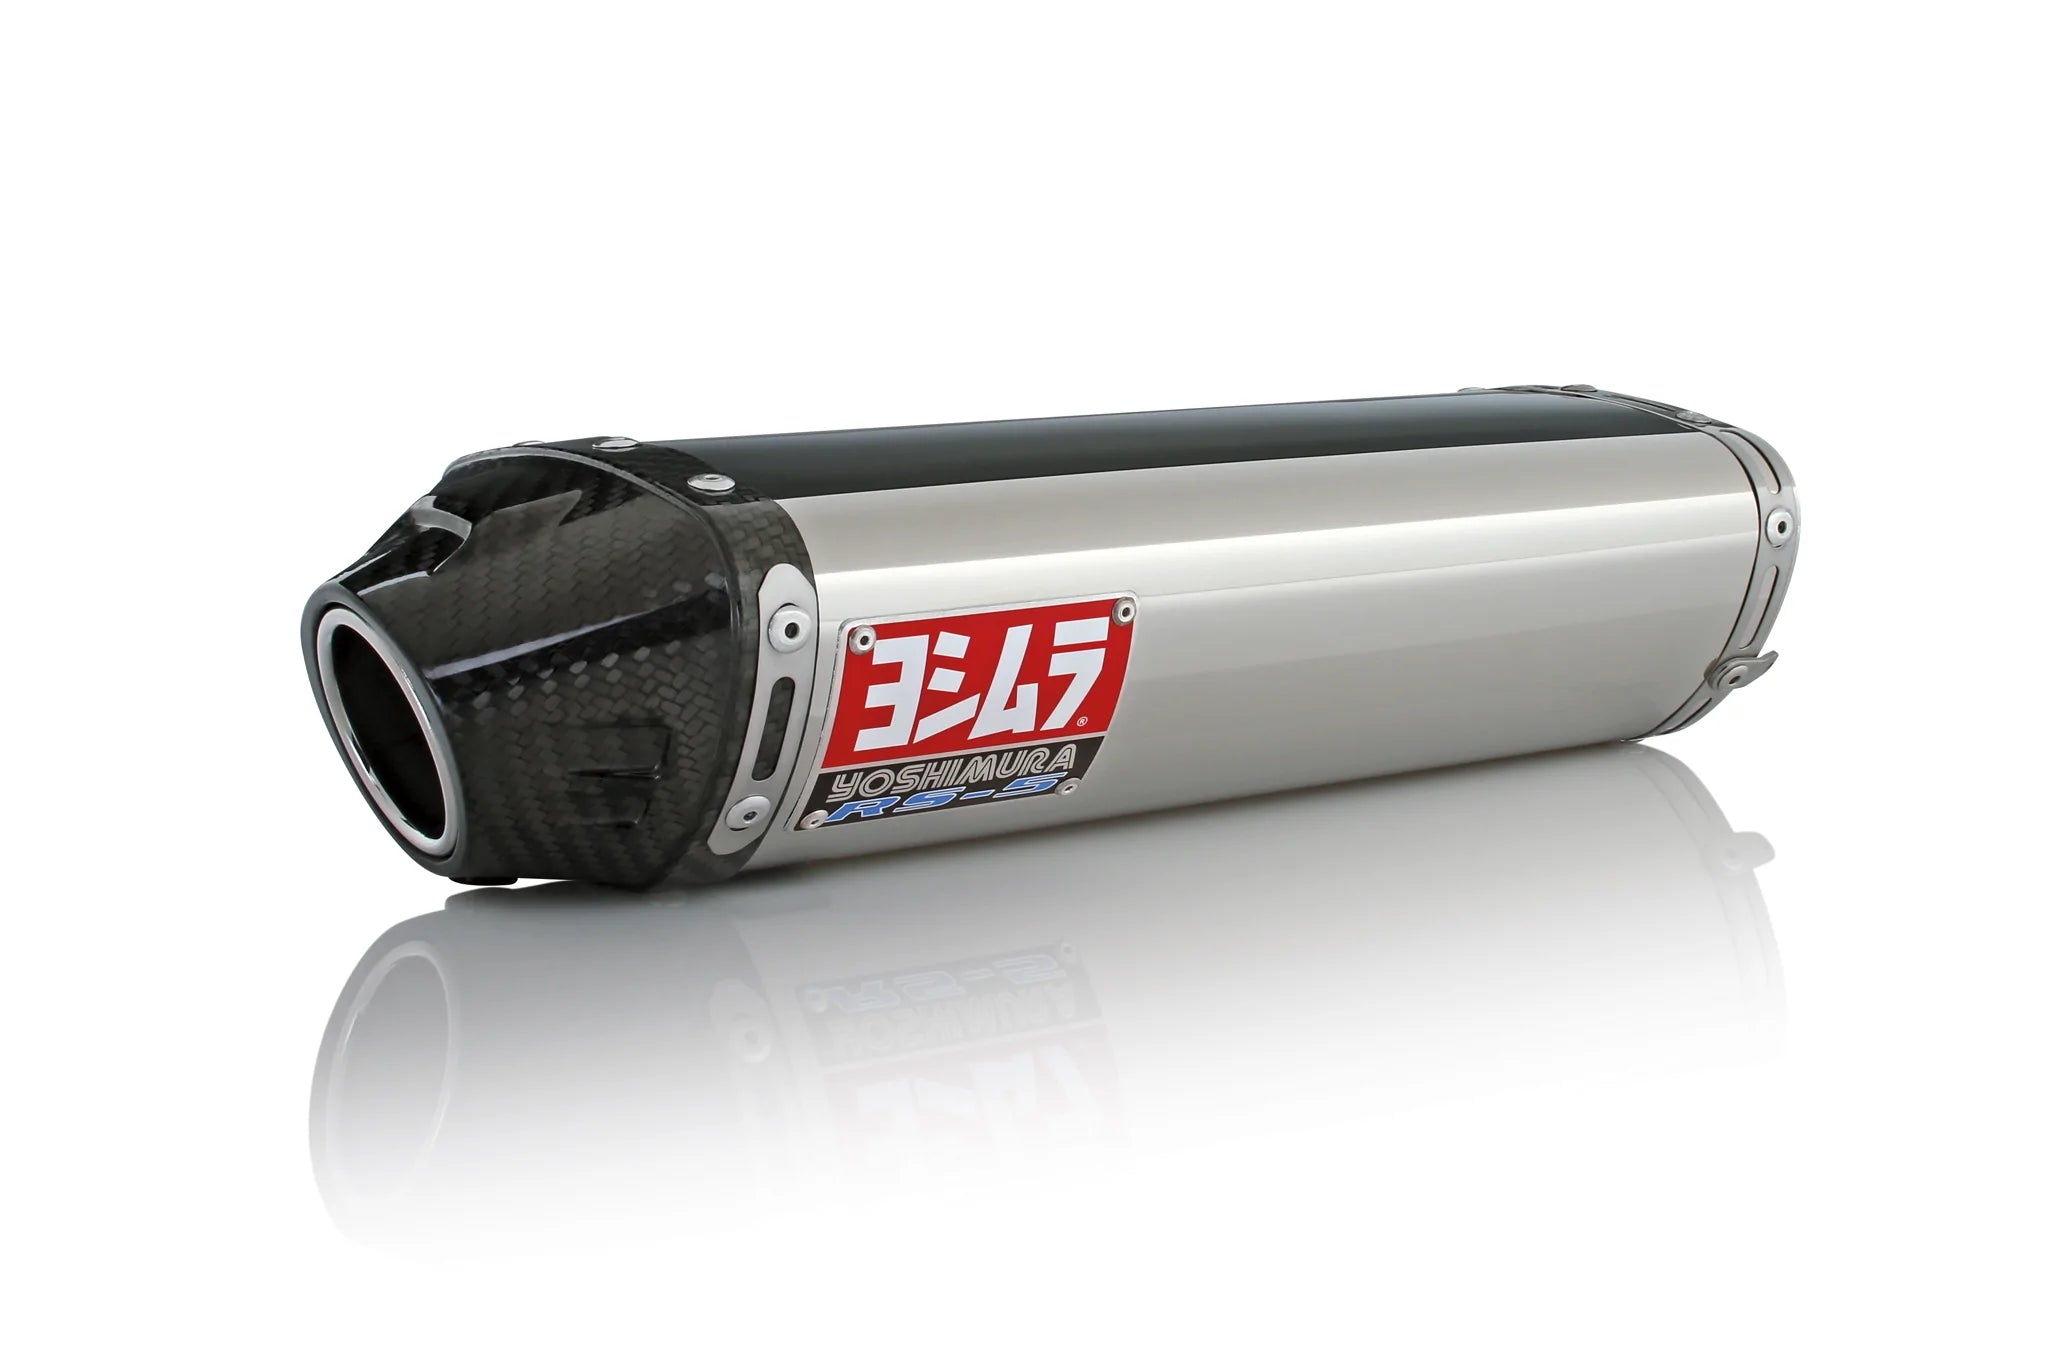 Yoshimura Zx-6r/Rr 05-06 Rs-5 Stainless Slip-On Exhaust, W/ Stainless Muffler